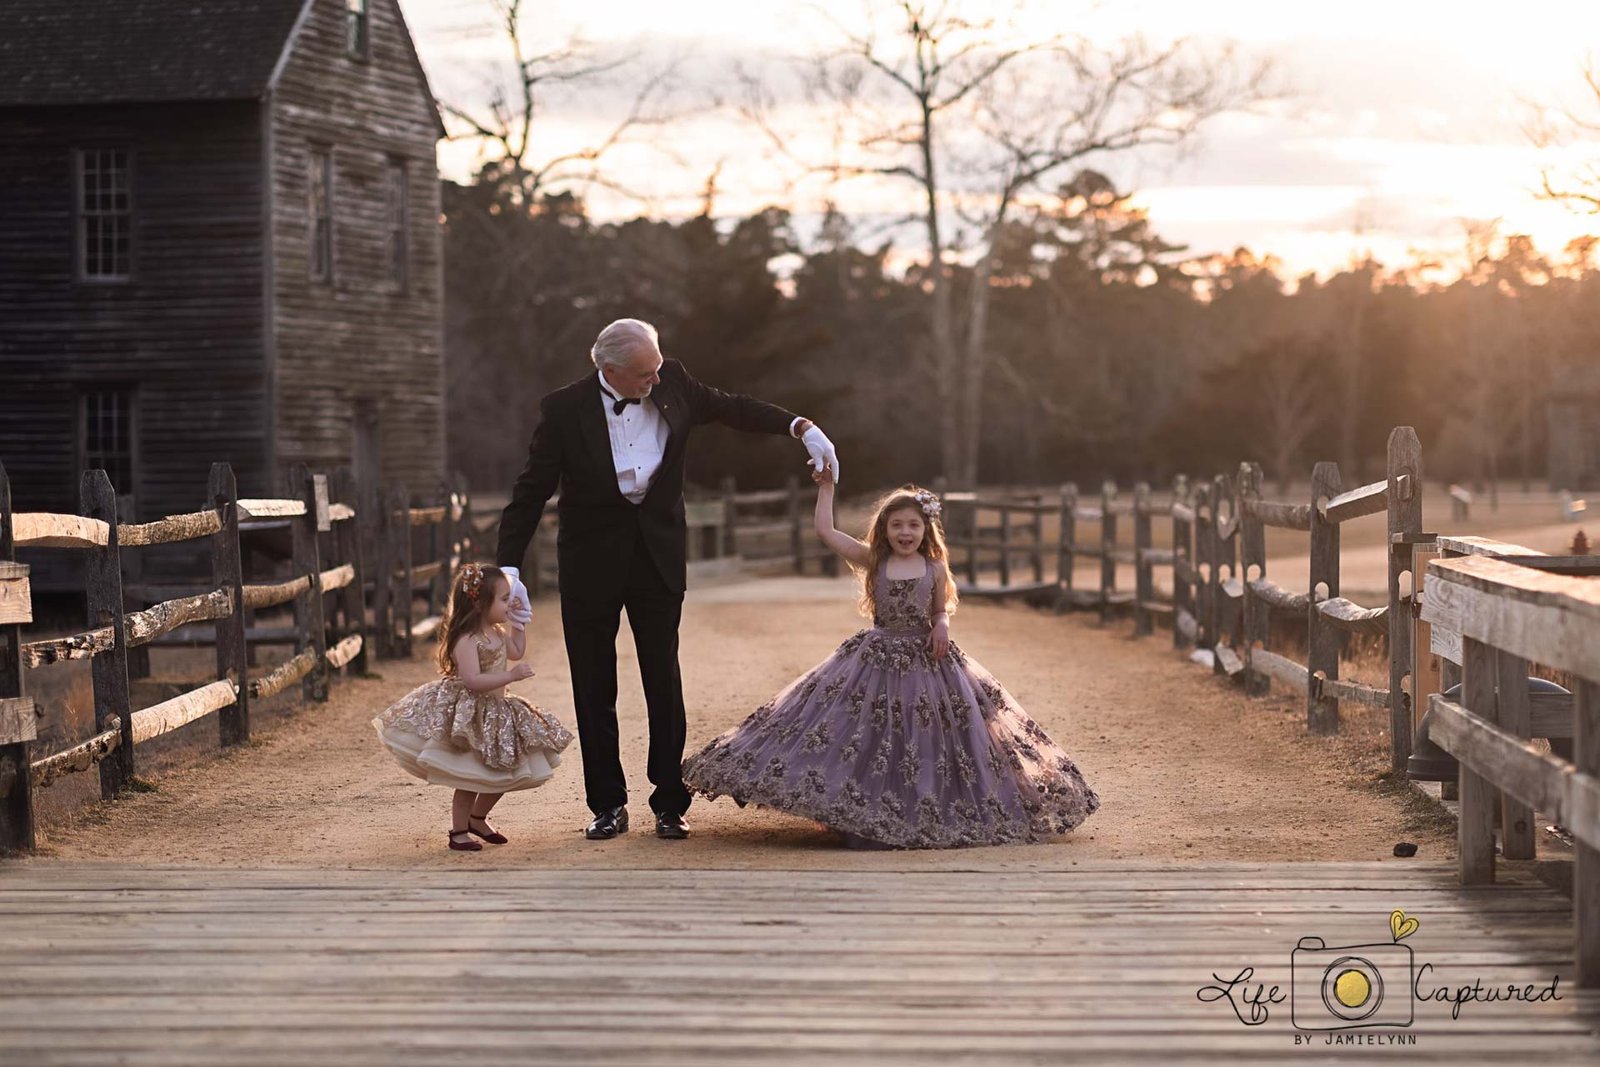 Granddaughters elegantly dressed with grandpa in family portraits